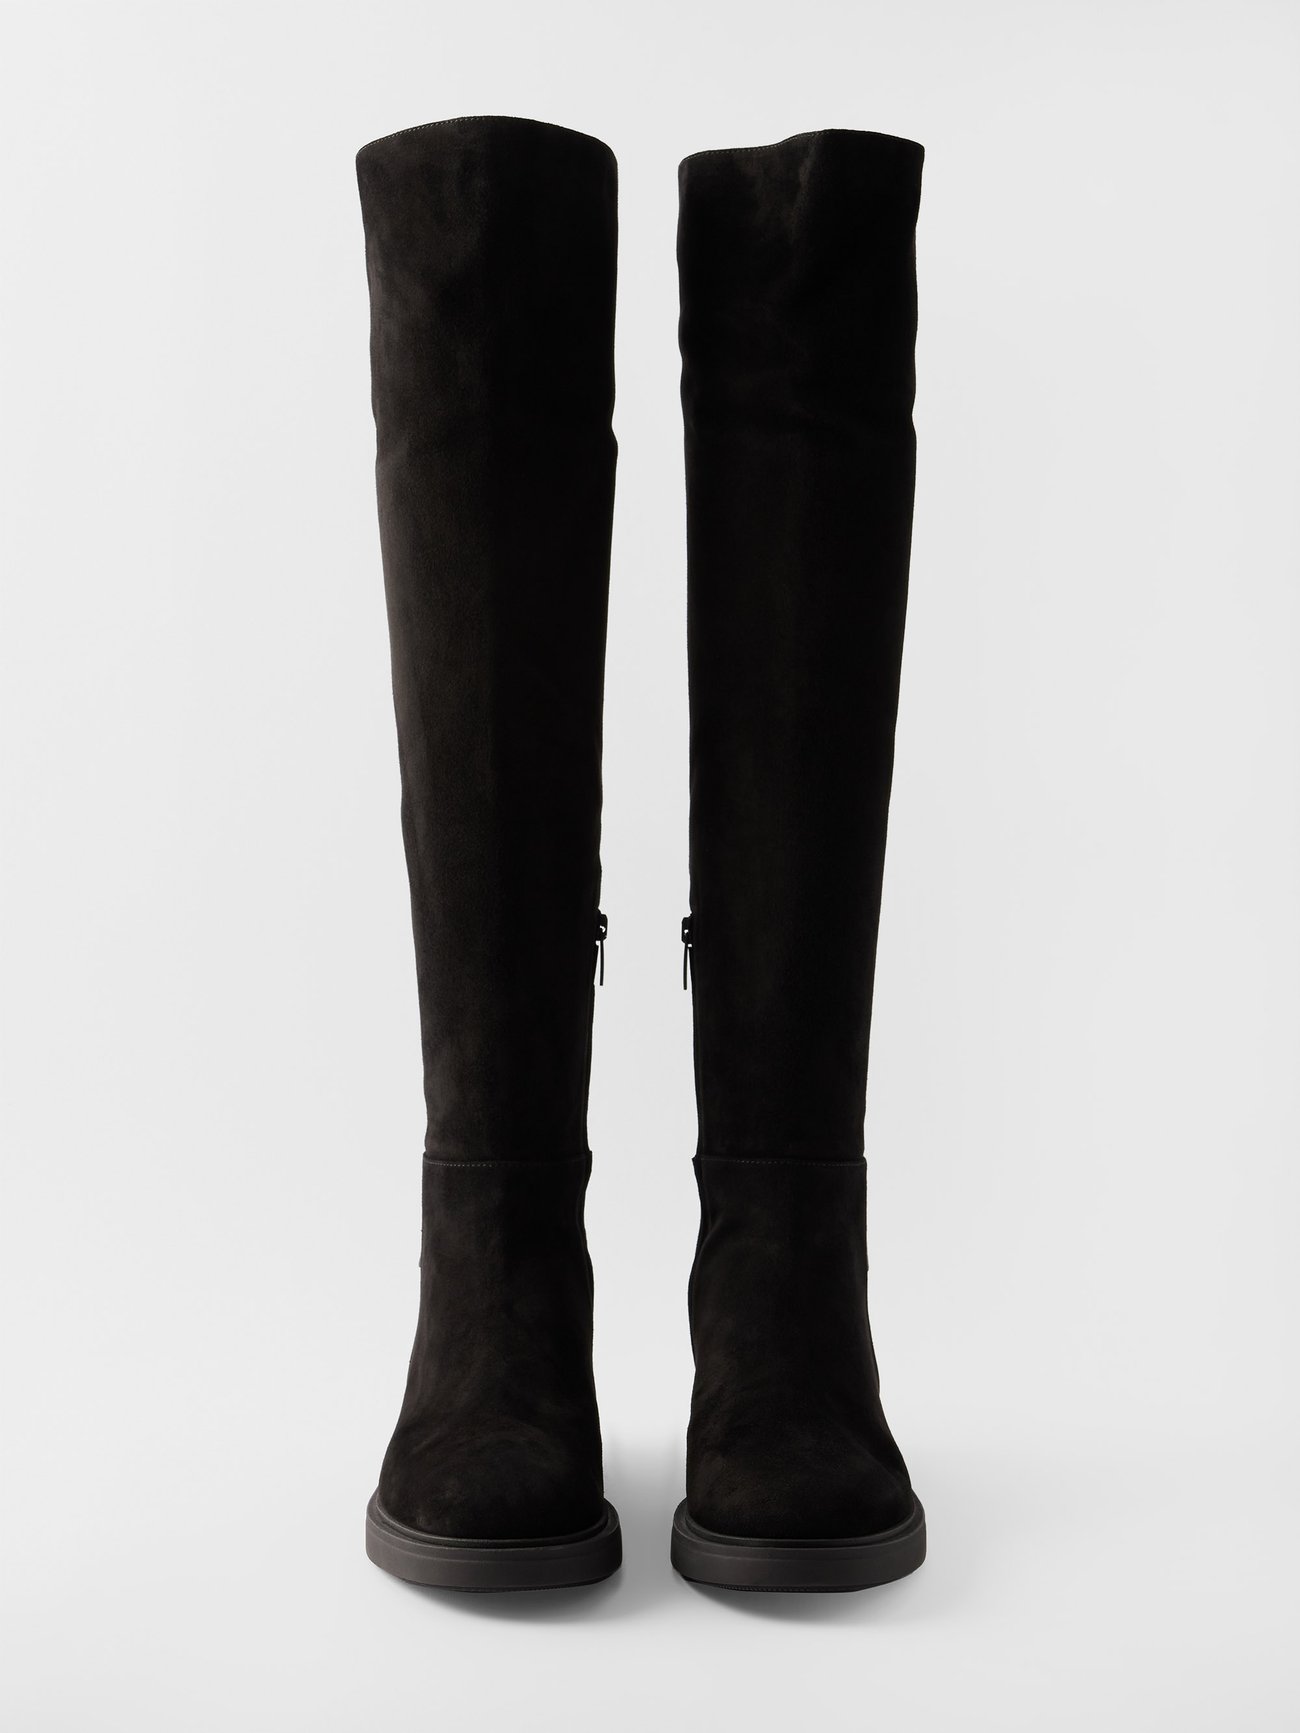 Lexington suede over-the-knee boots